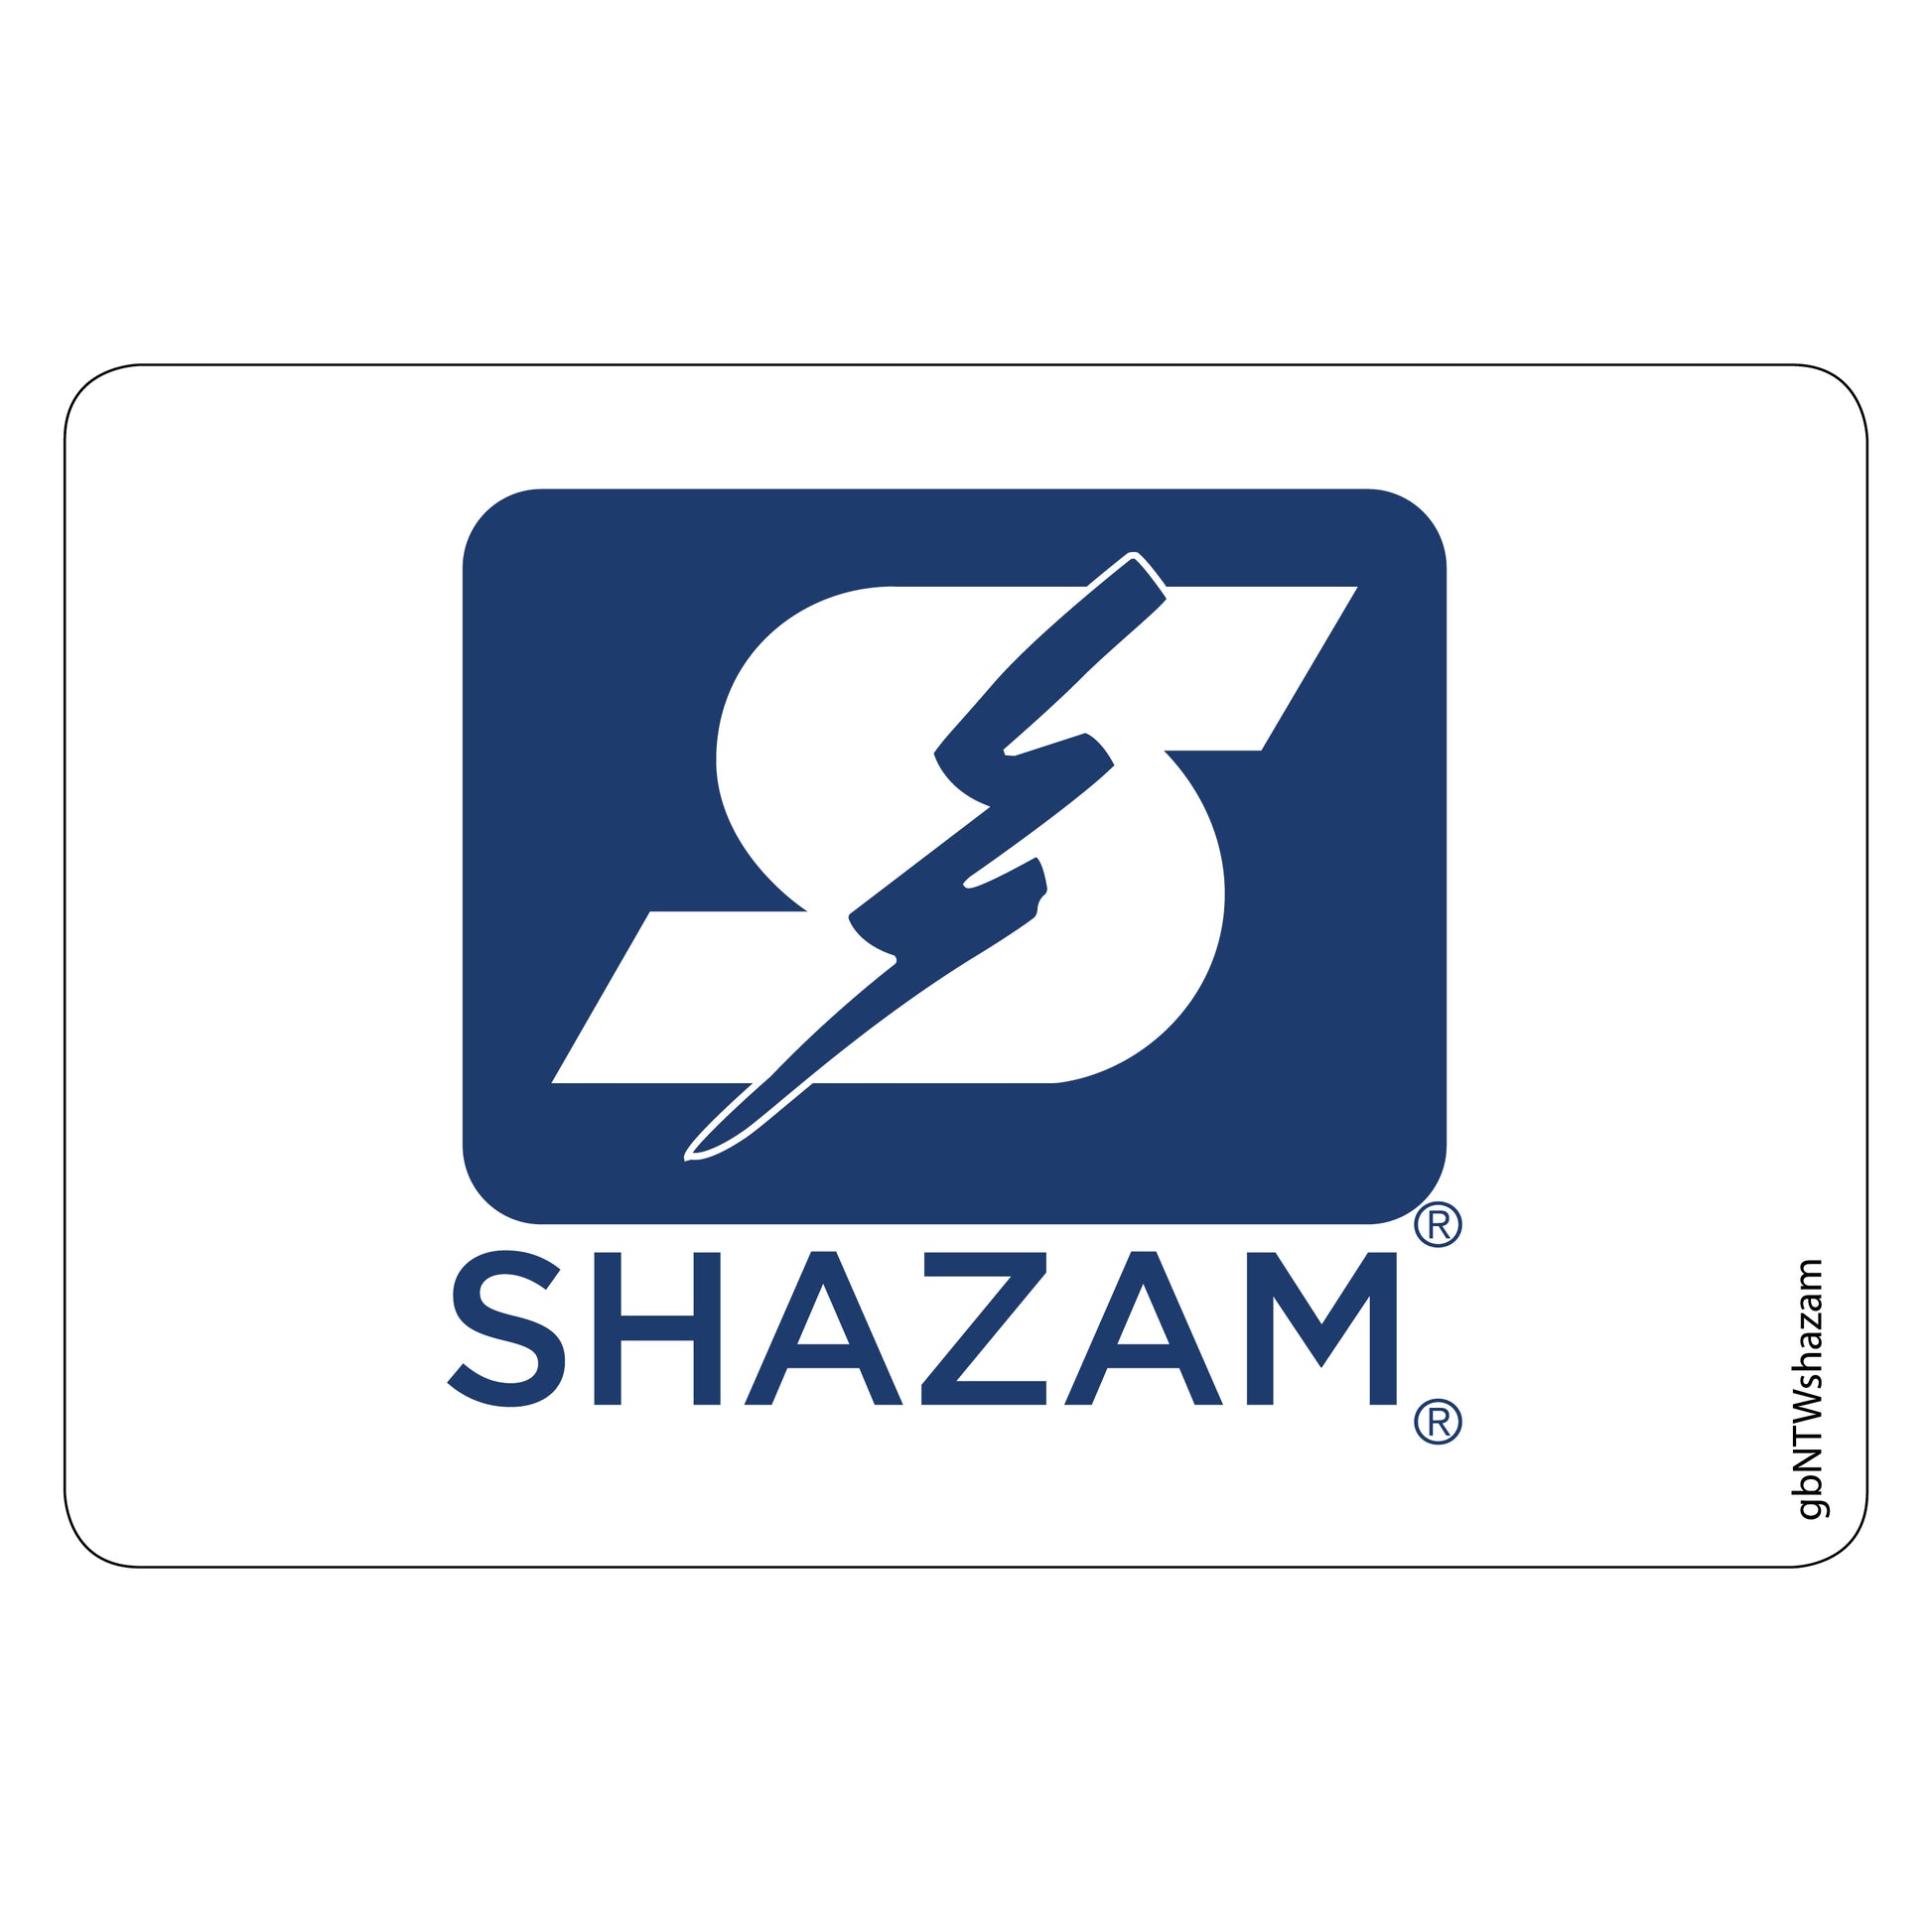 Single Network Decal, Shazam. 3 inches by 2 inches in size.